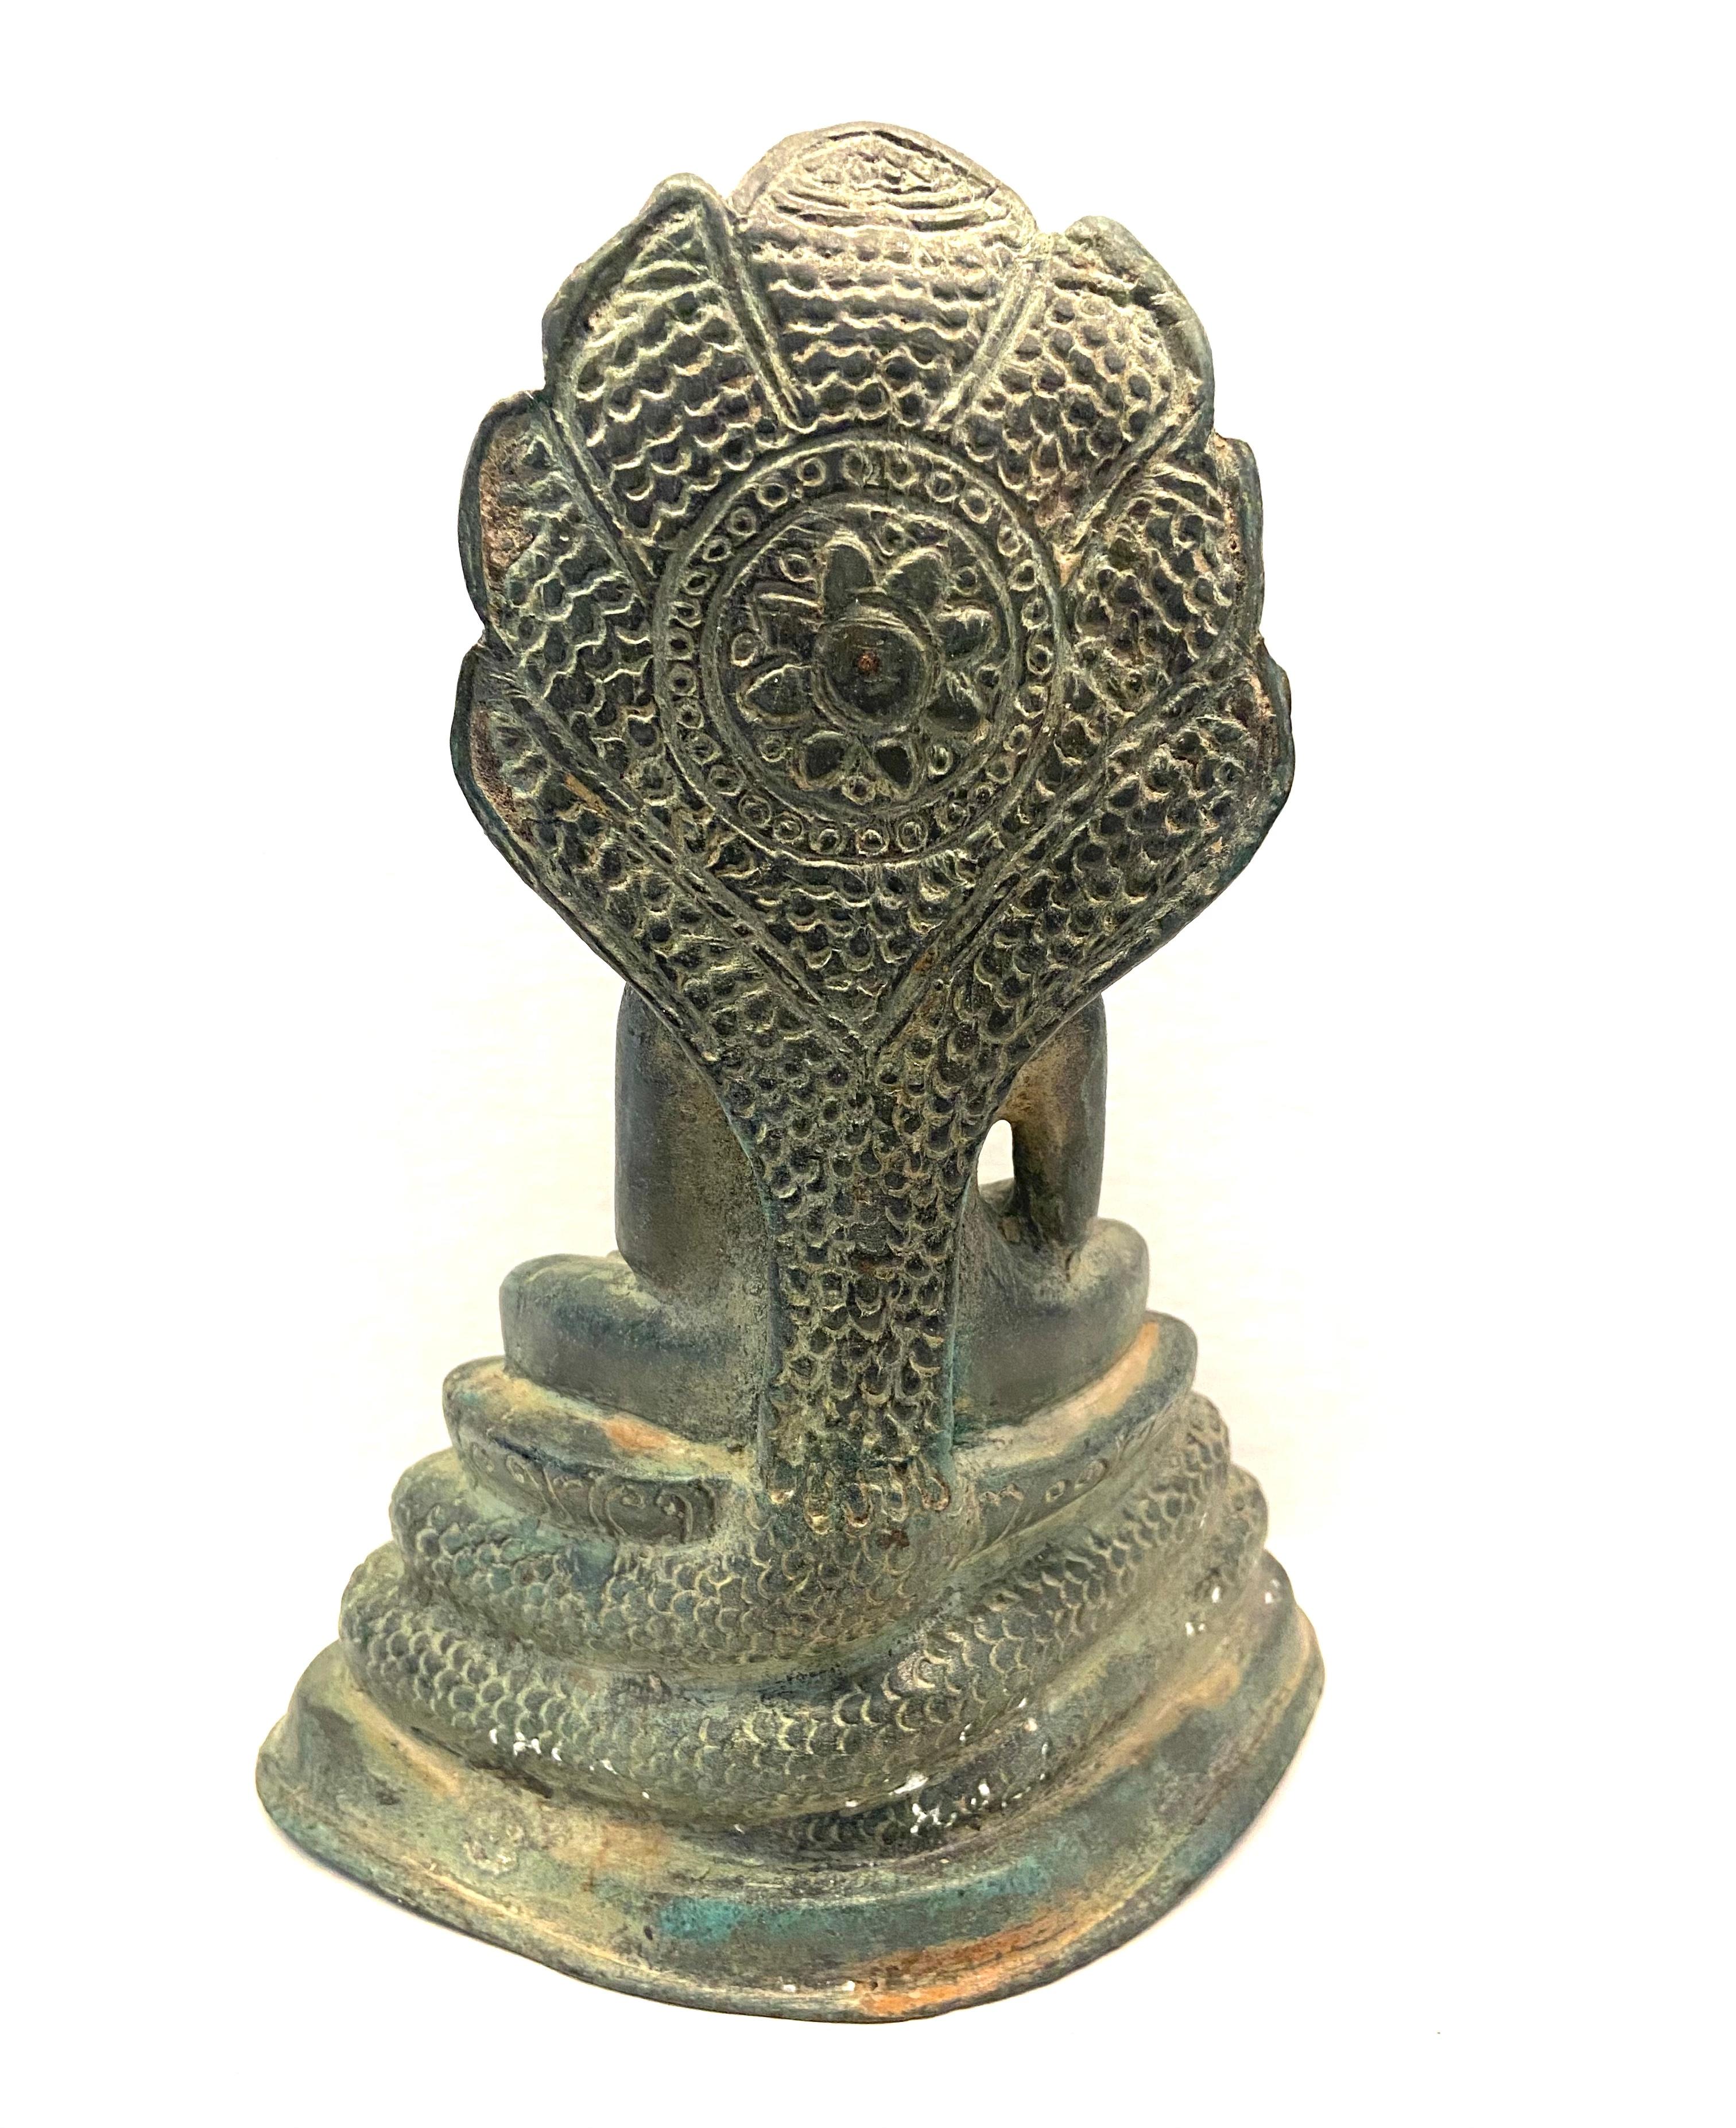 This Cambodian bronze Naga Buddha has been hand-cast. The Naga primarily represents rebirth, and mortality. The cult of the animistic Naga (Cobra) is an ancient practice in India and was readily taken up in Cambodia. Sitting in meditation on four